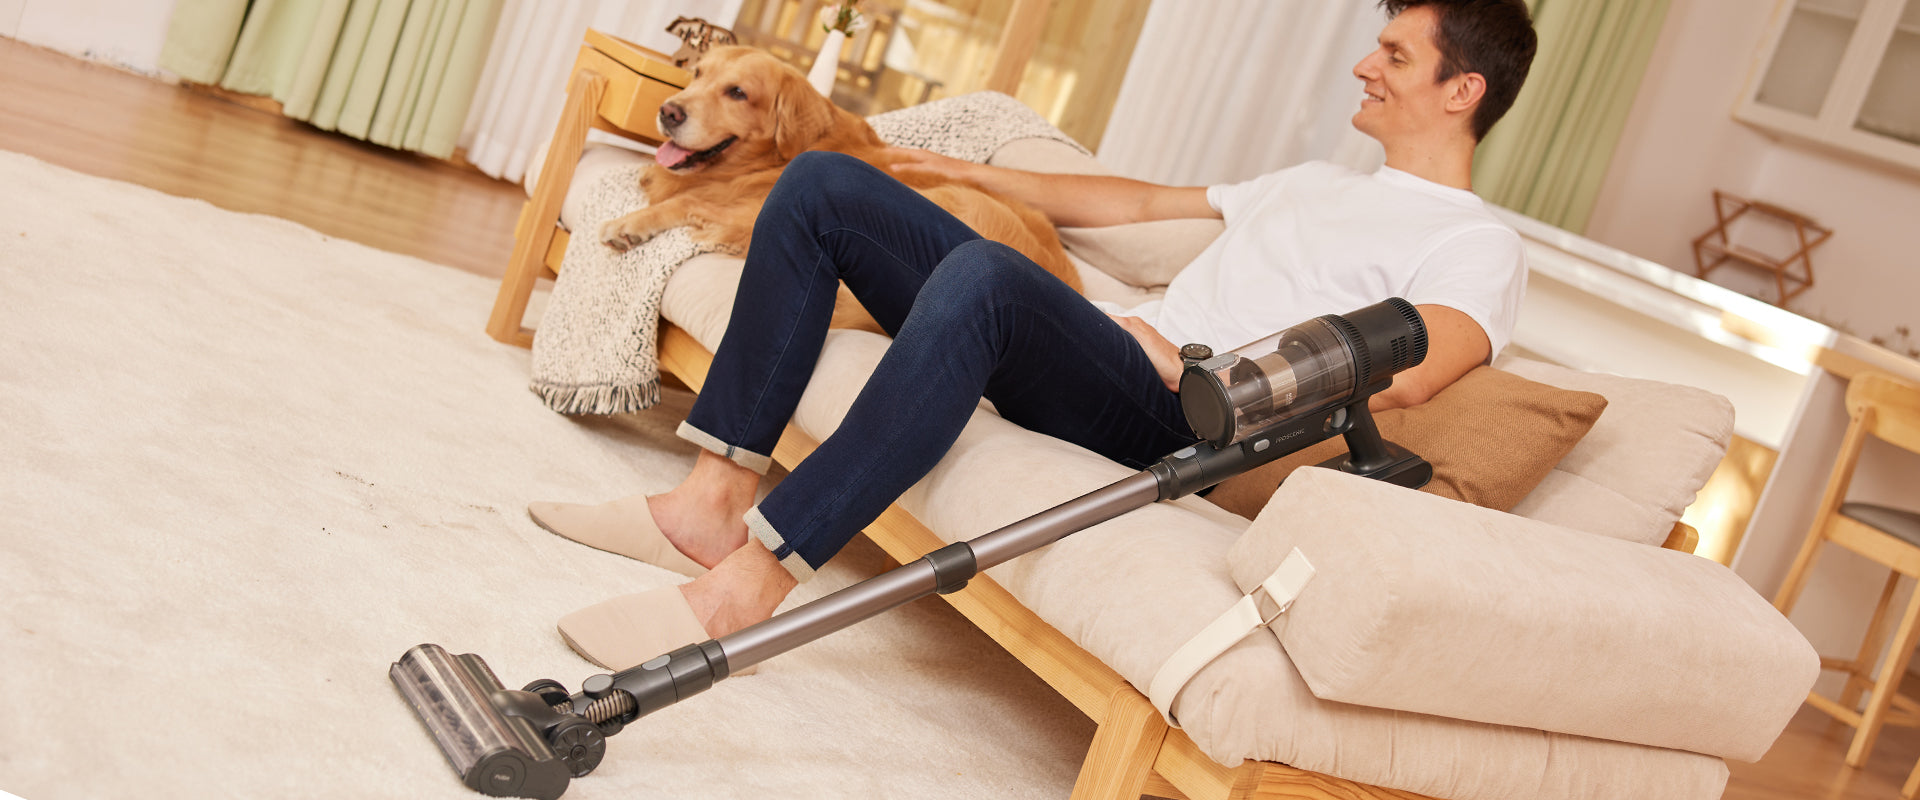  Proscenic Vacuum Cleaners for Home, P11 Mopping 35Kpa Cordless  Vacuum Cleaner and Mop Combo with Touch Screen, Stick Vacuum Equipped  5-Stage Filtration System, Hardwood Floor Vacuum for Pet Hair, Car